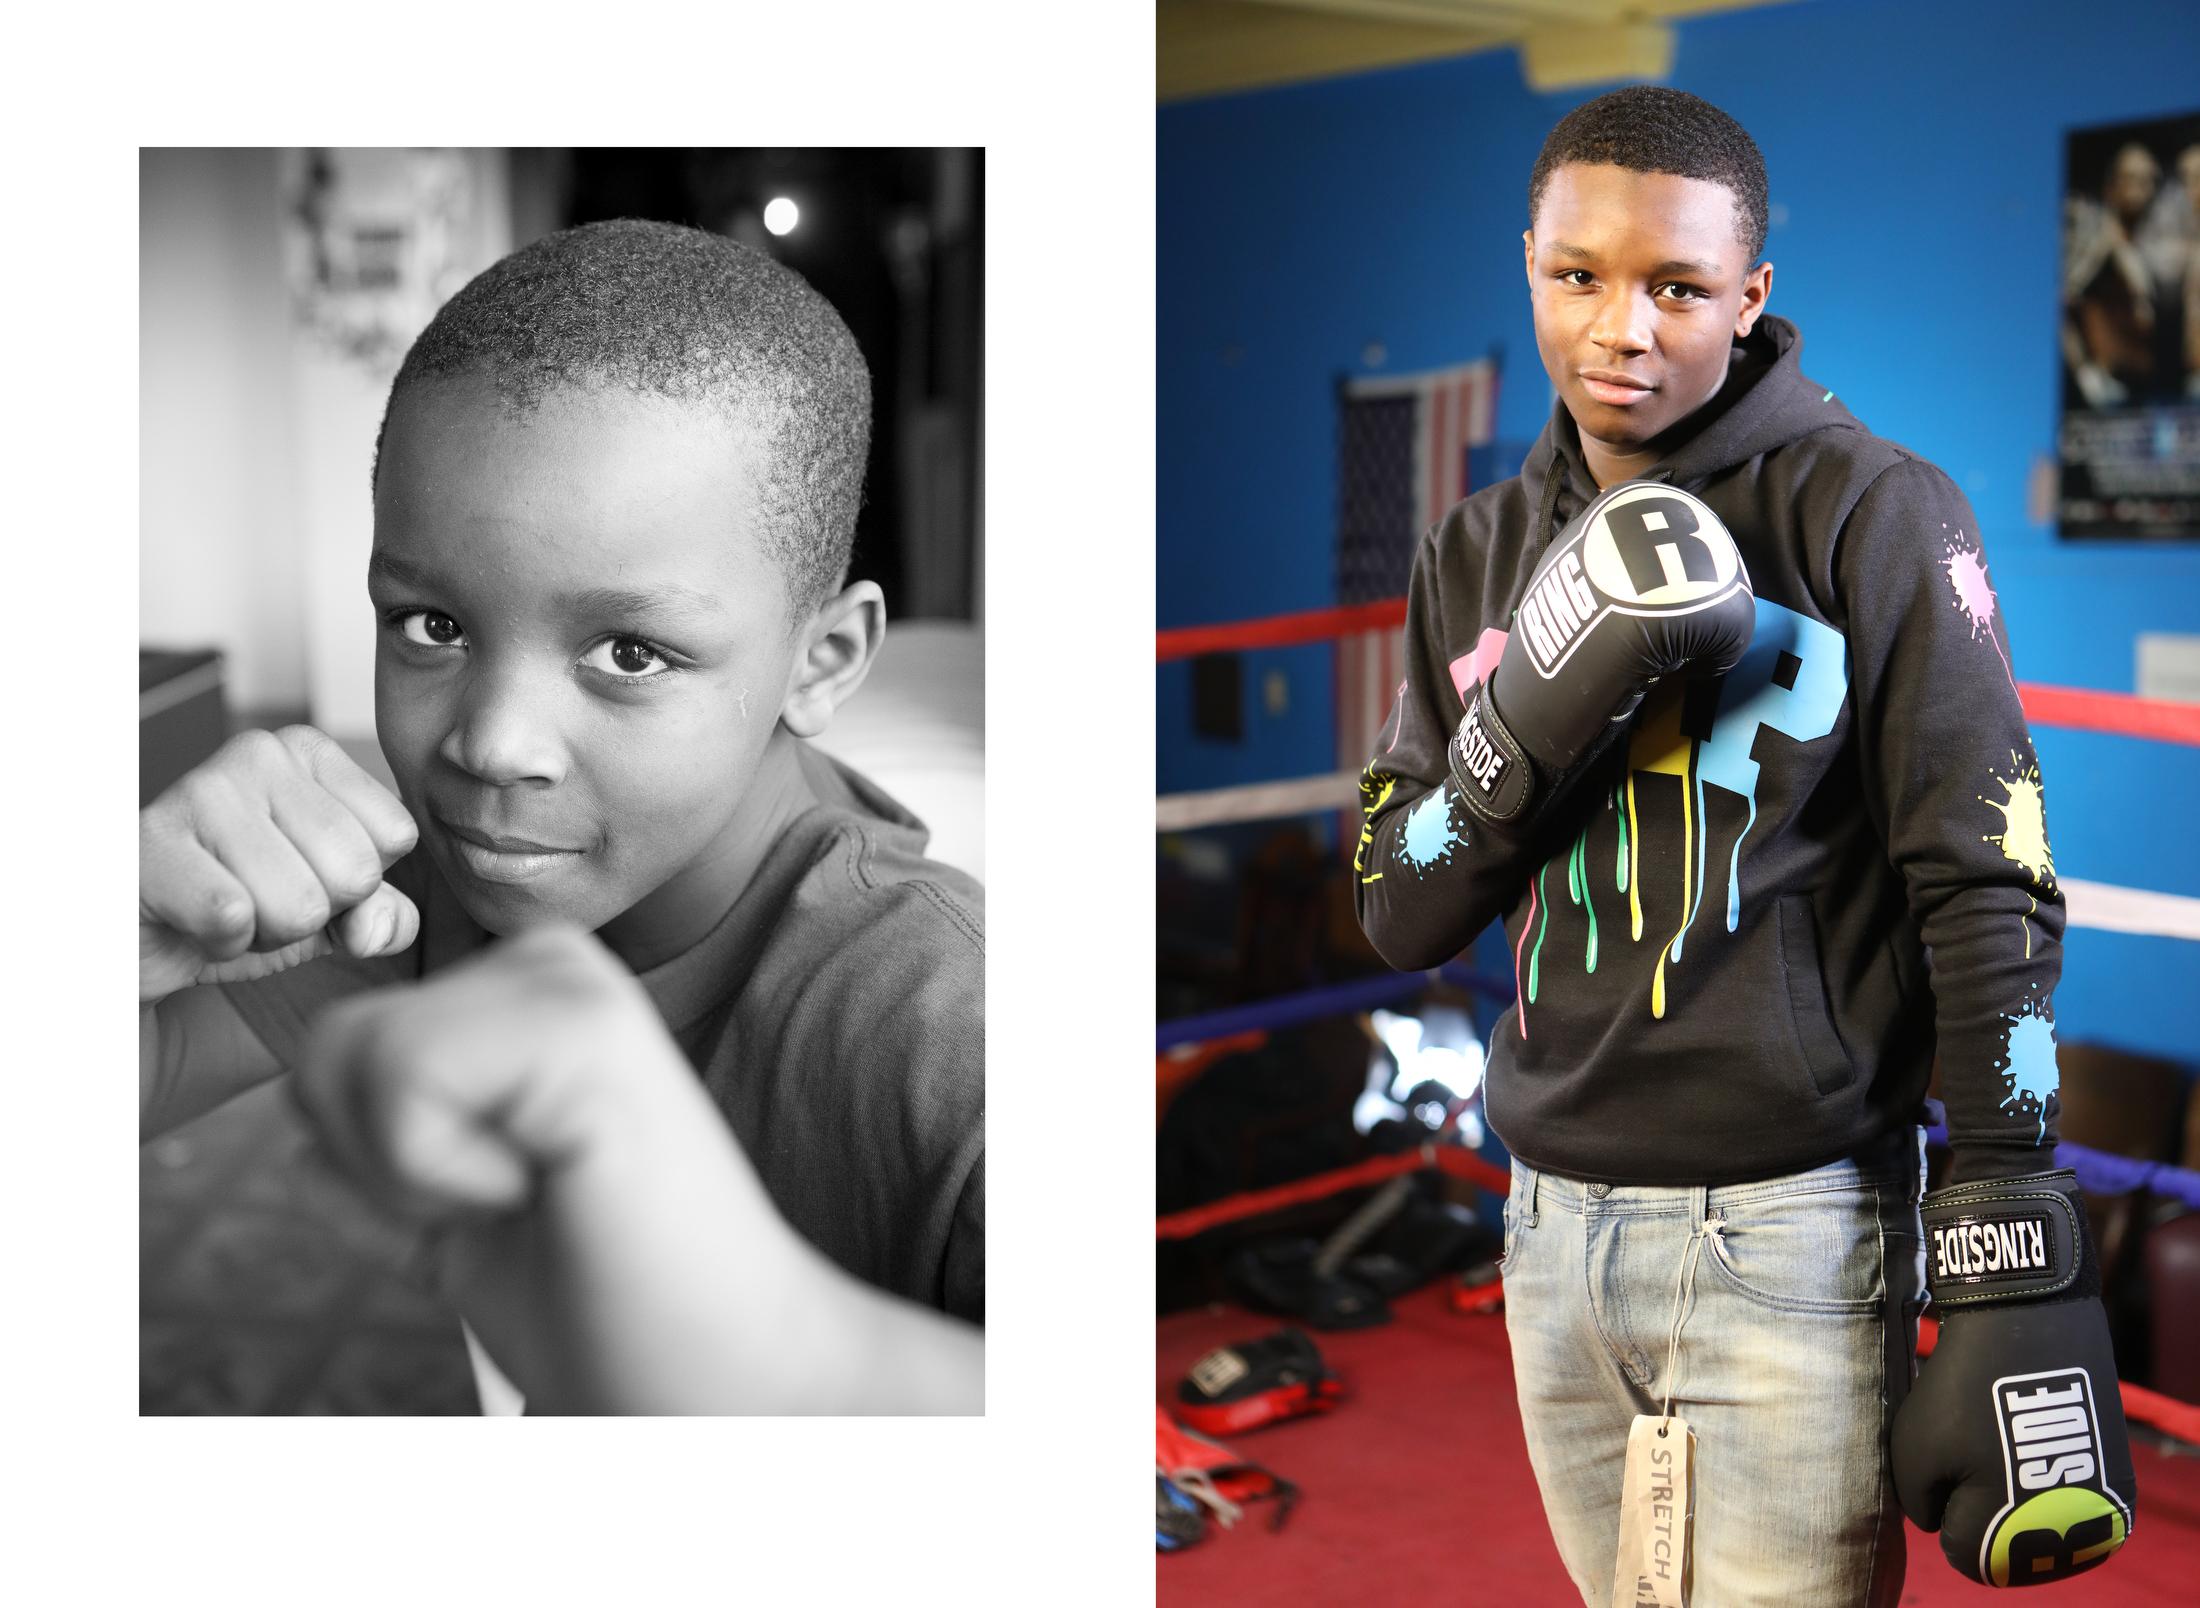 10 years in a boxing gym - Rasheed